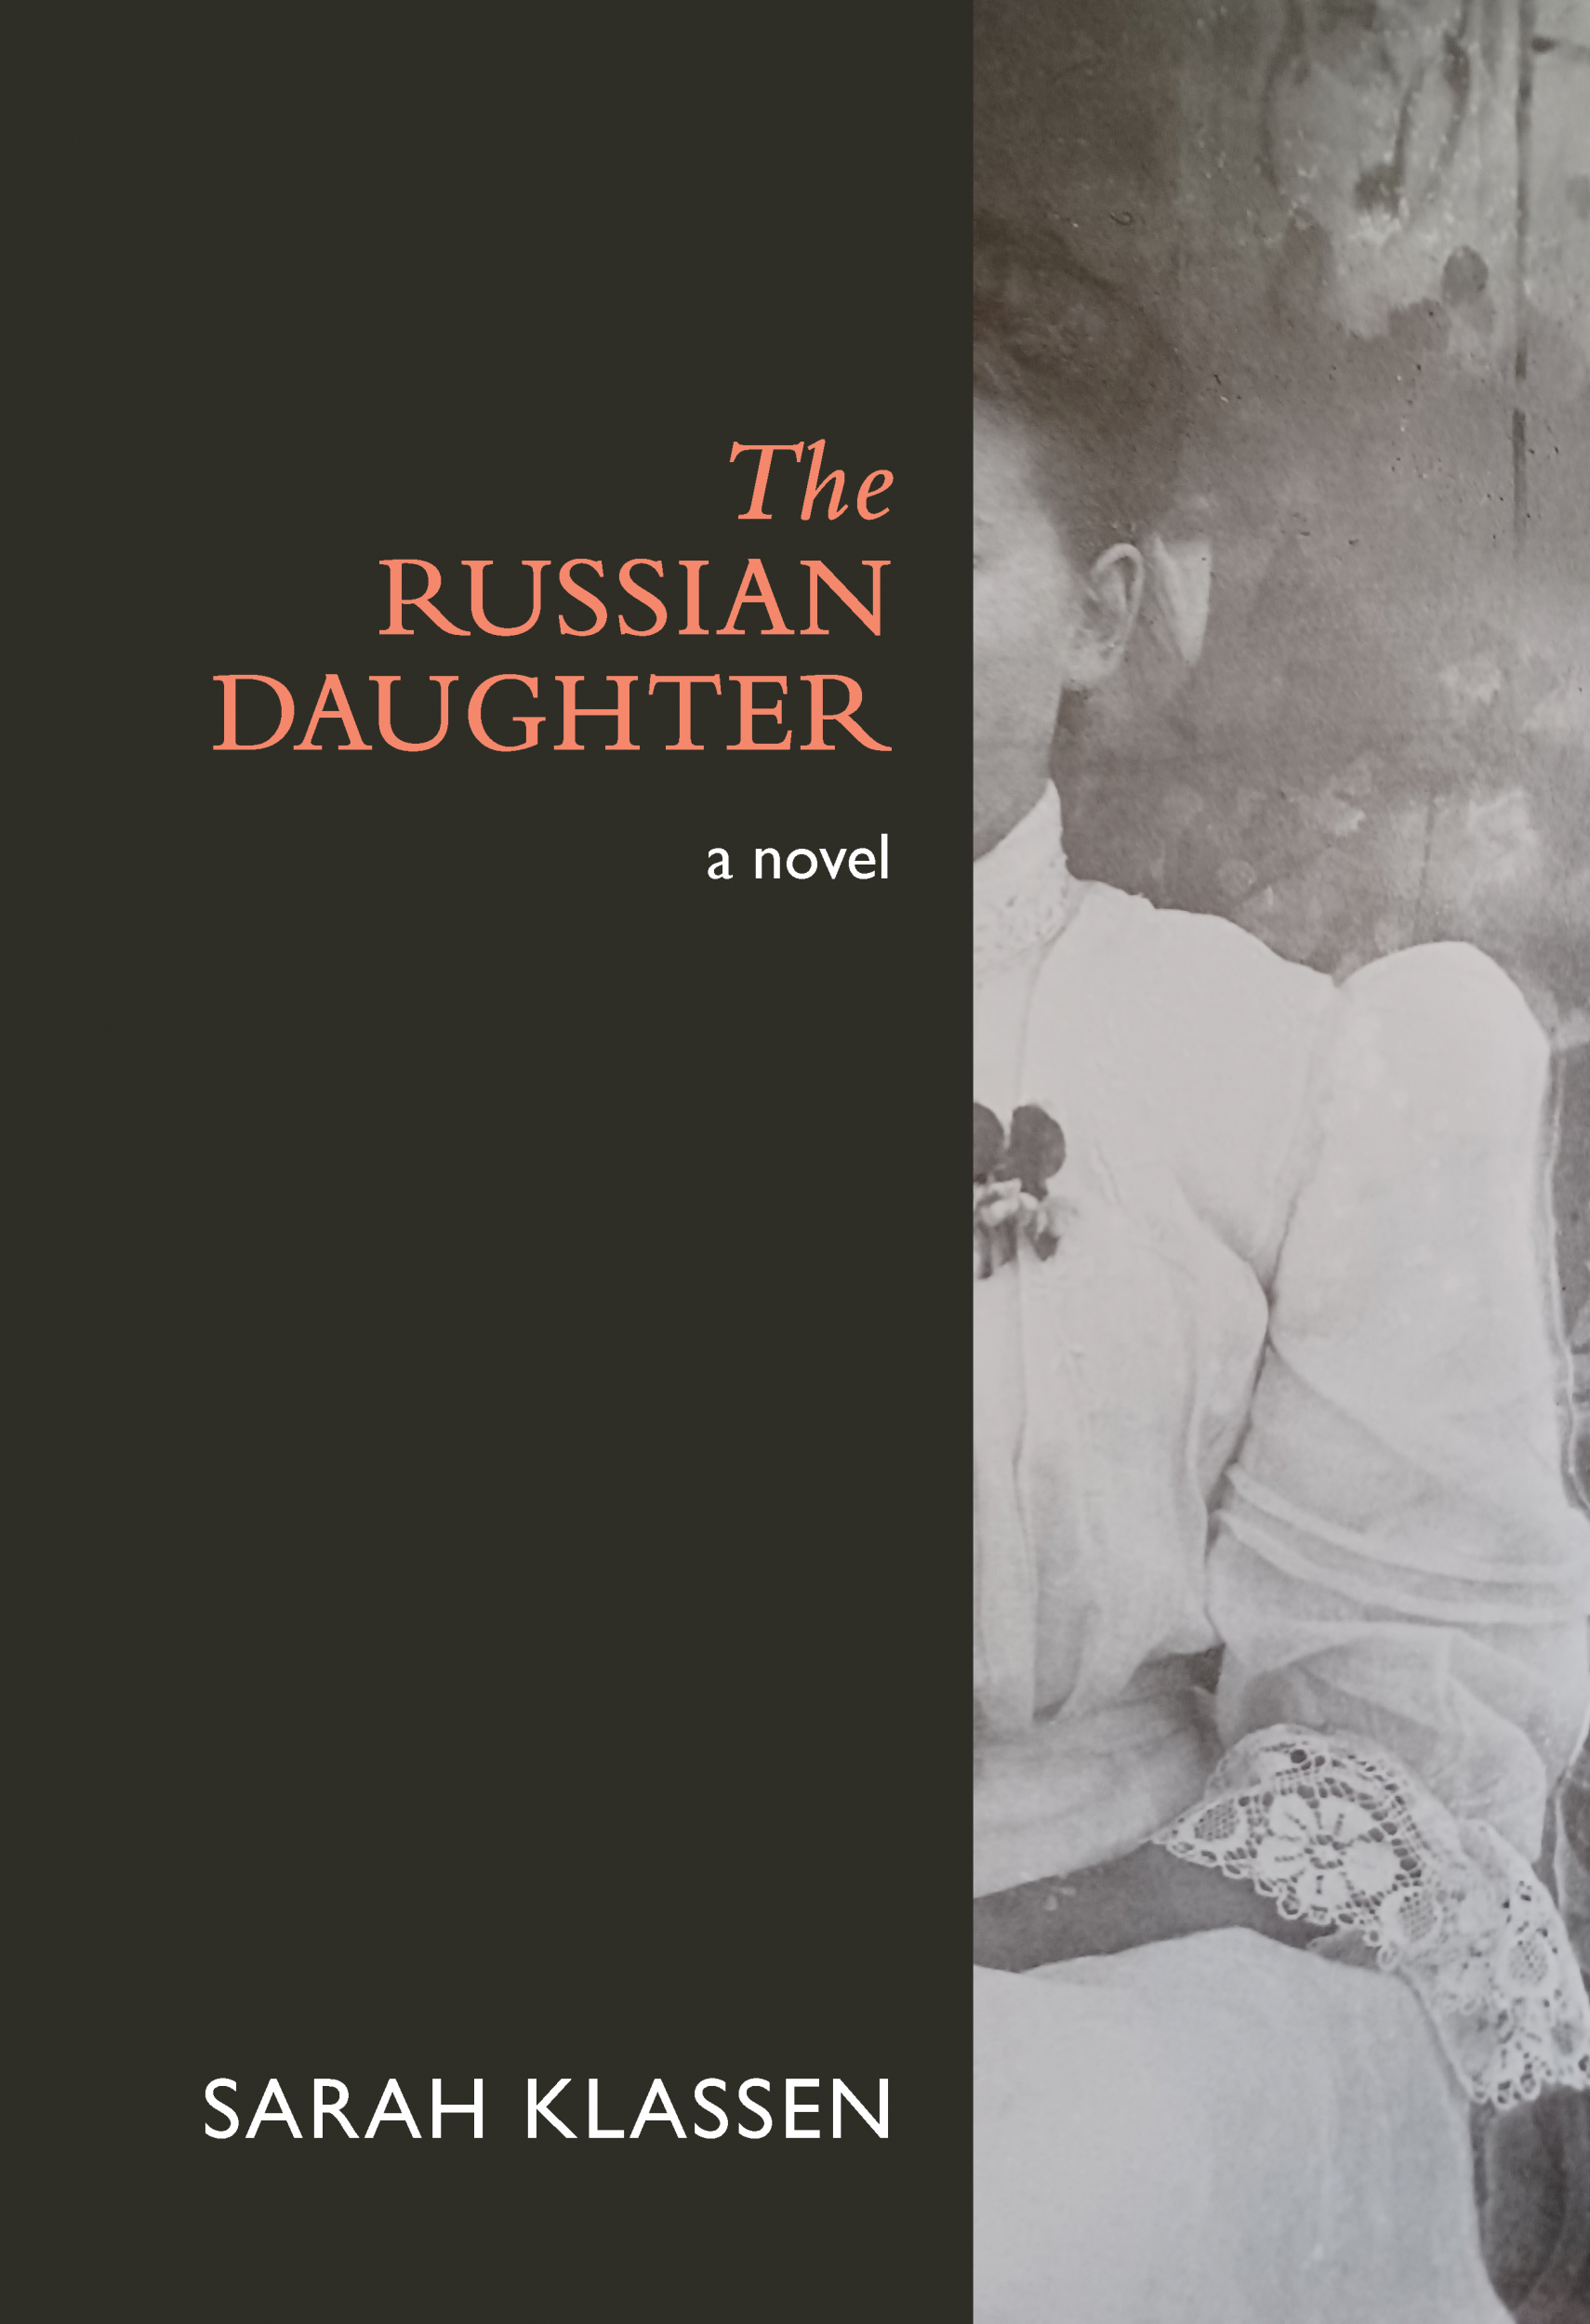 The Russian Daughter